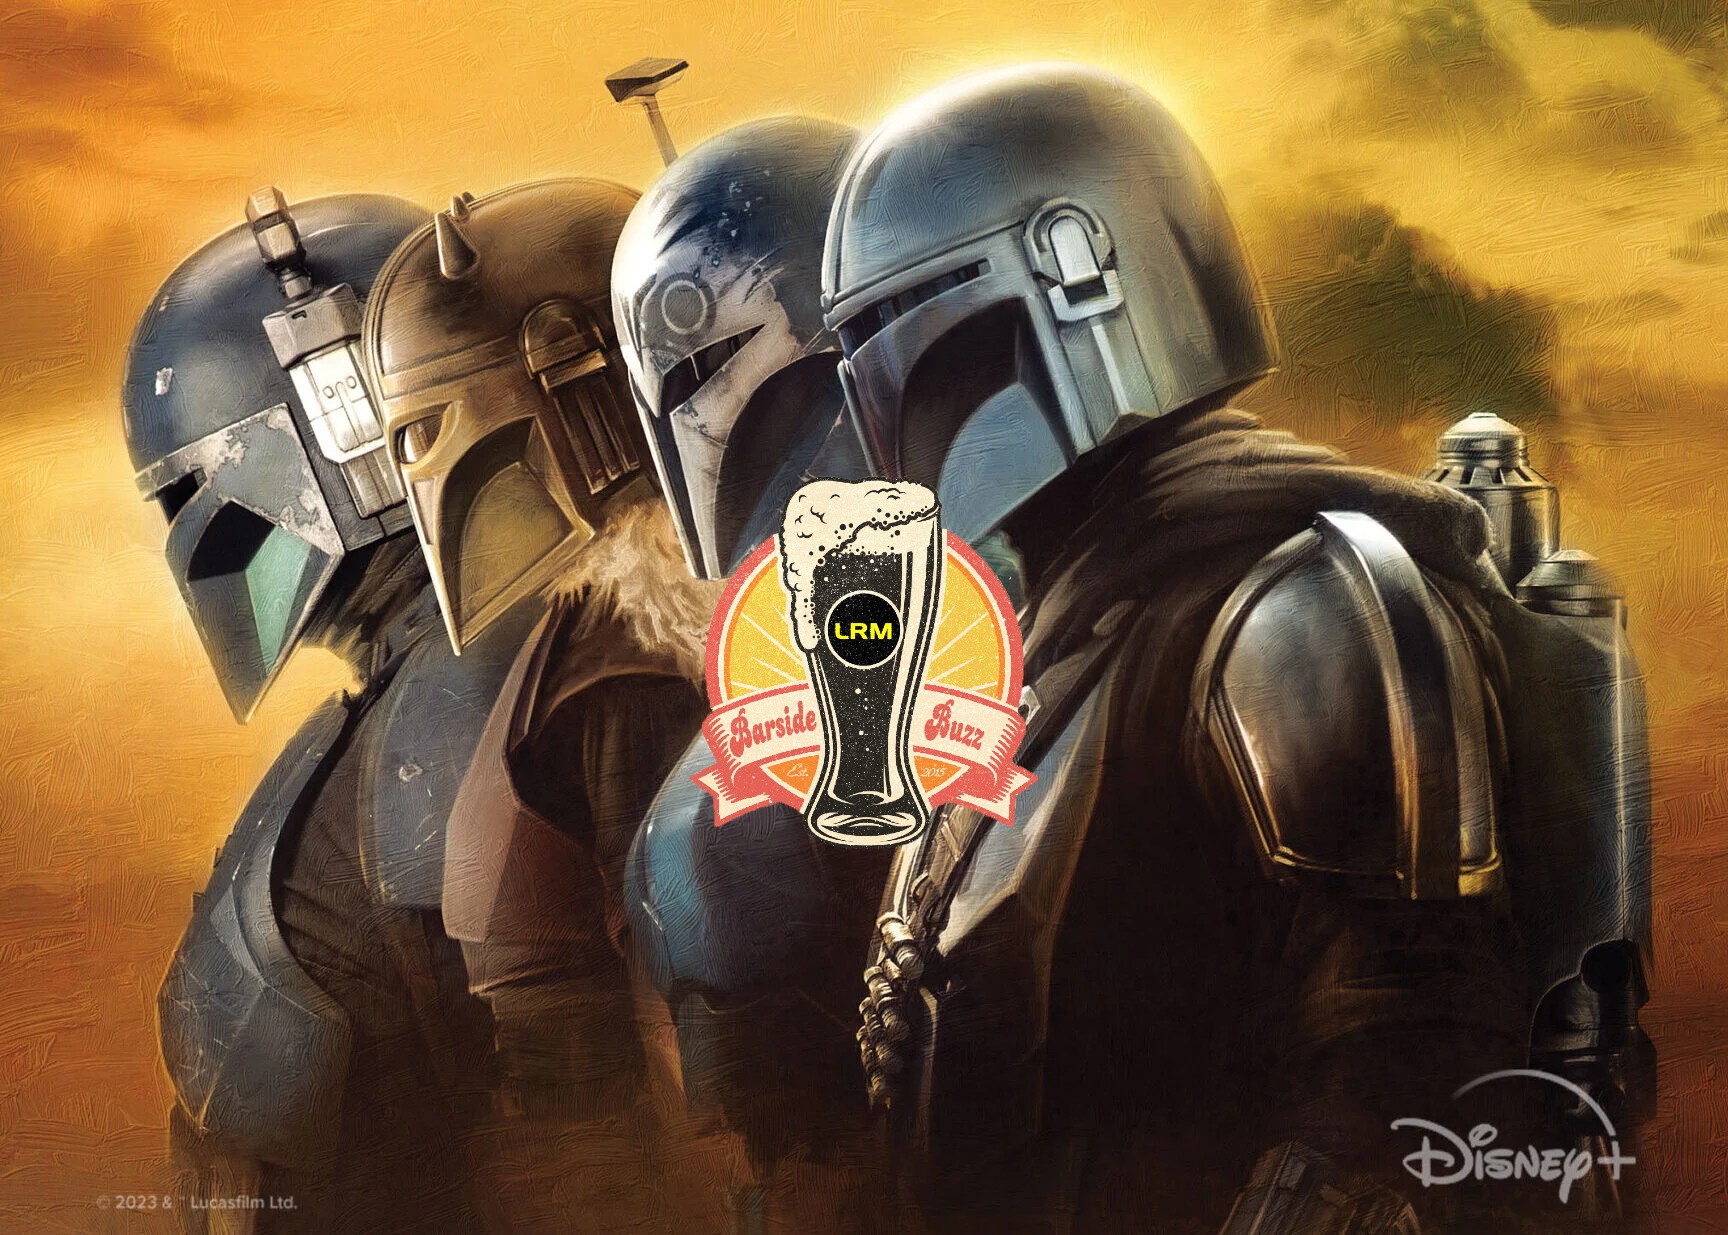 According to the Barside Buzz the next Star Wars movie The Mandalorian and Grogu will film from June to October and have a lower budget.